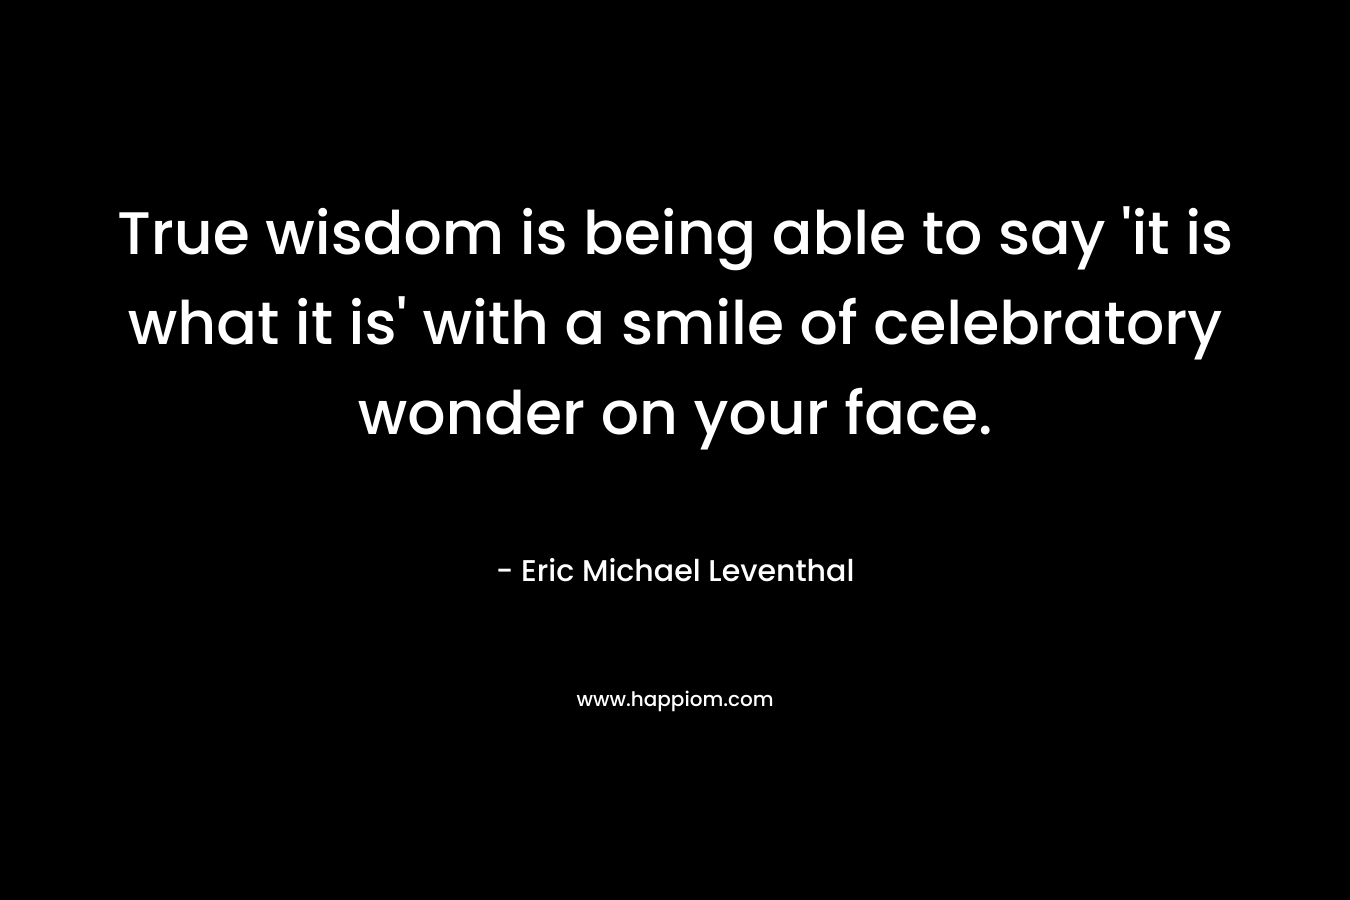 True wisdom is being able to say 'it is what it is' with a smile of celebratory wonder on your face.